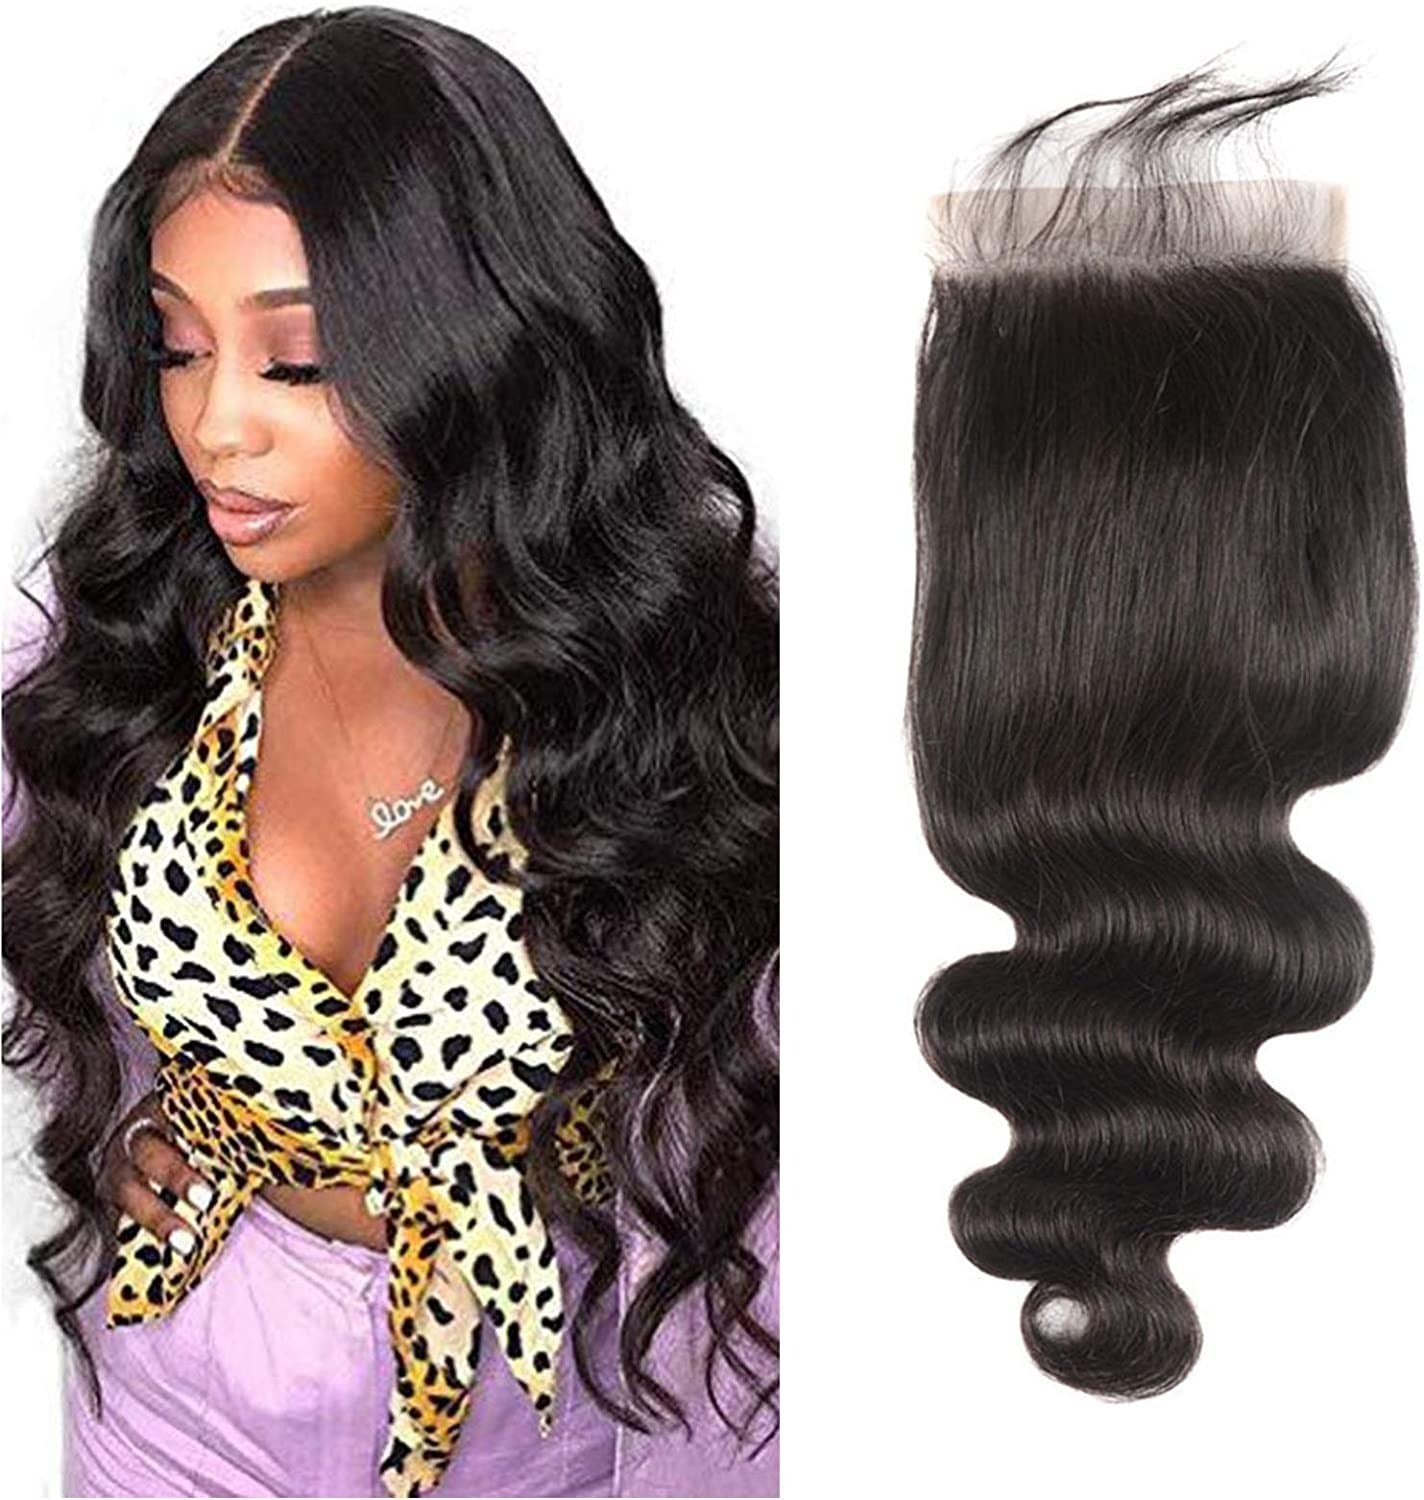 12A Closure 4X4 Free Part Body Wave Virgin Hair Extensions. - Ramas Hair And Beauty